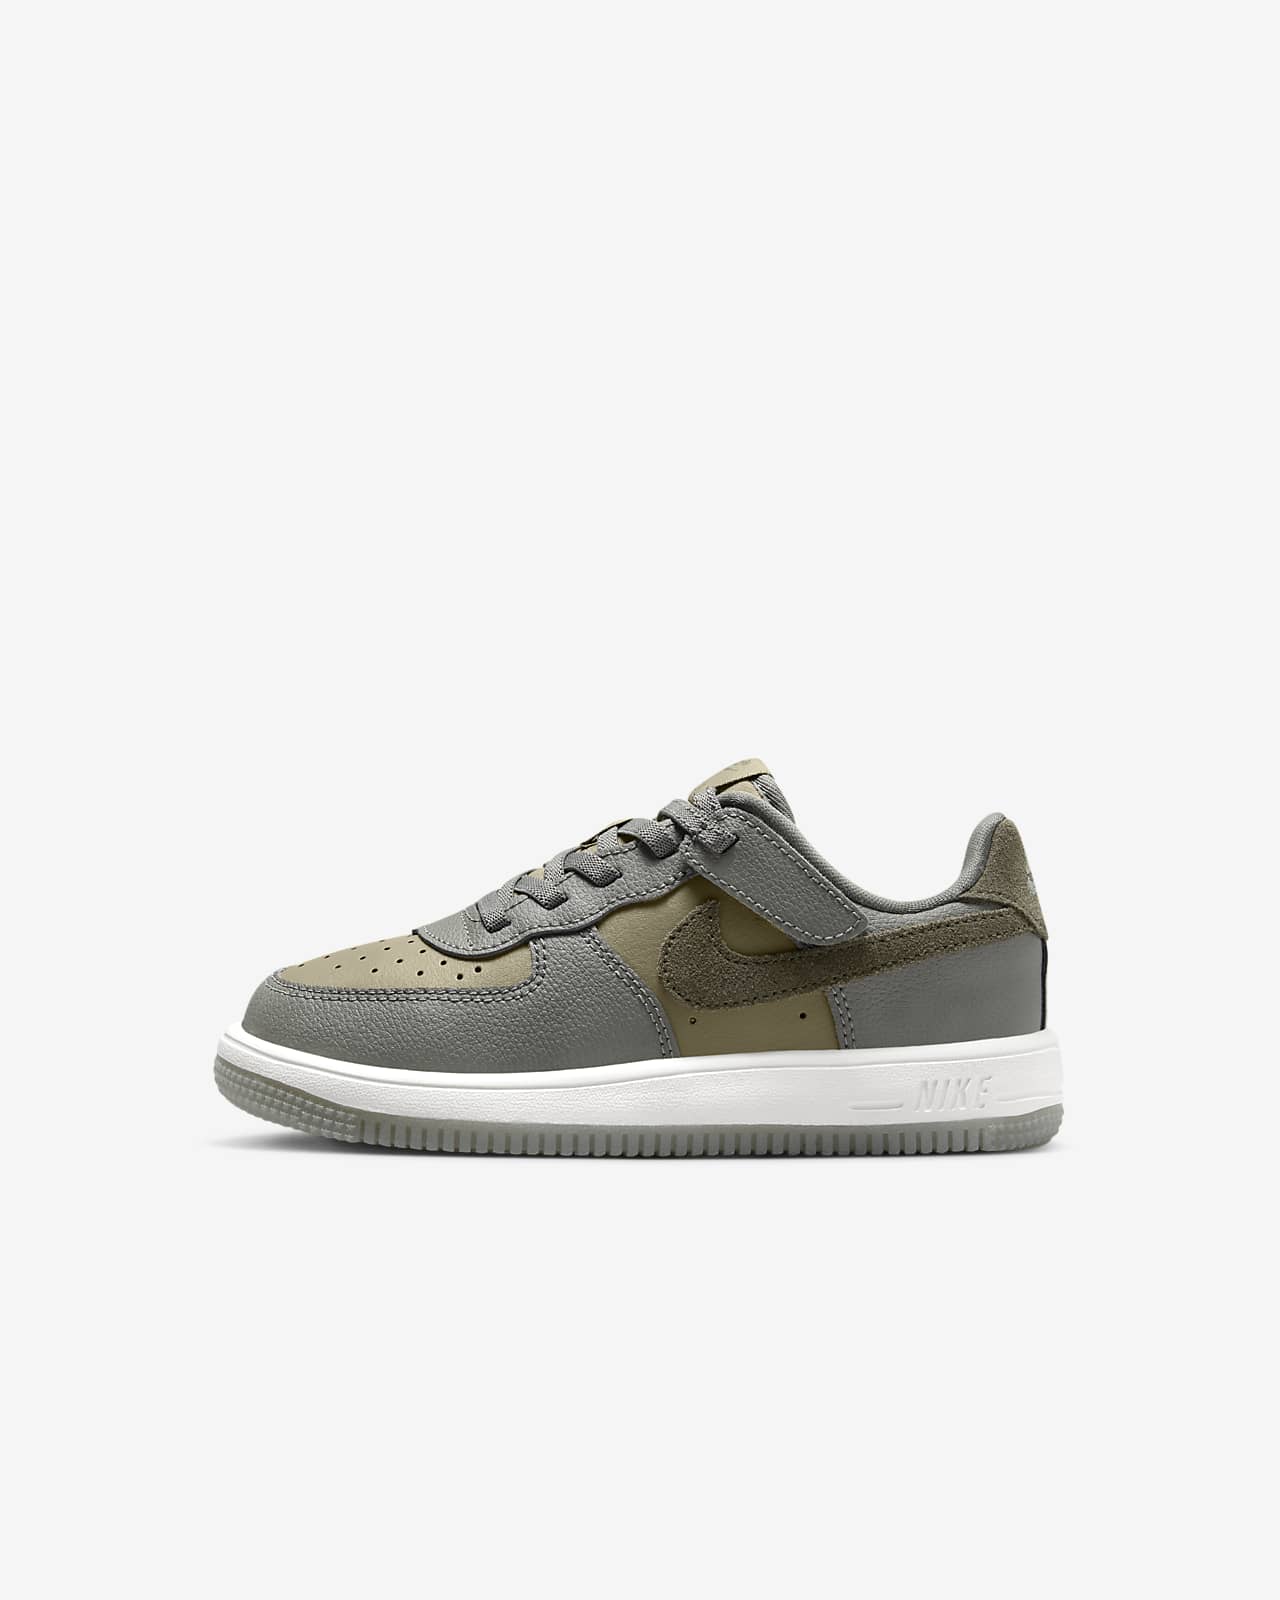 Nike Force 1 Low LV8 EasyOn Younger Kids' Shoes